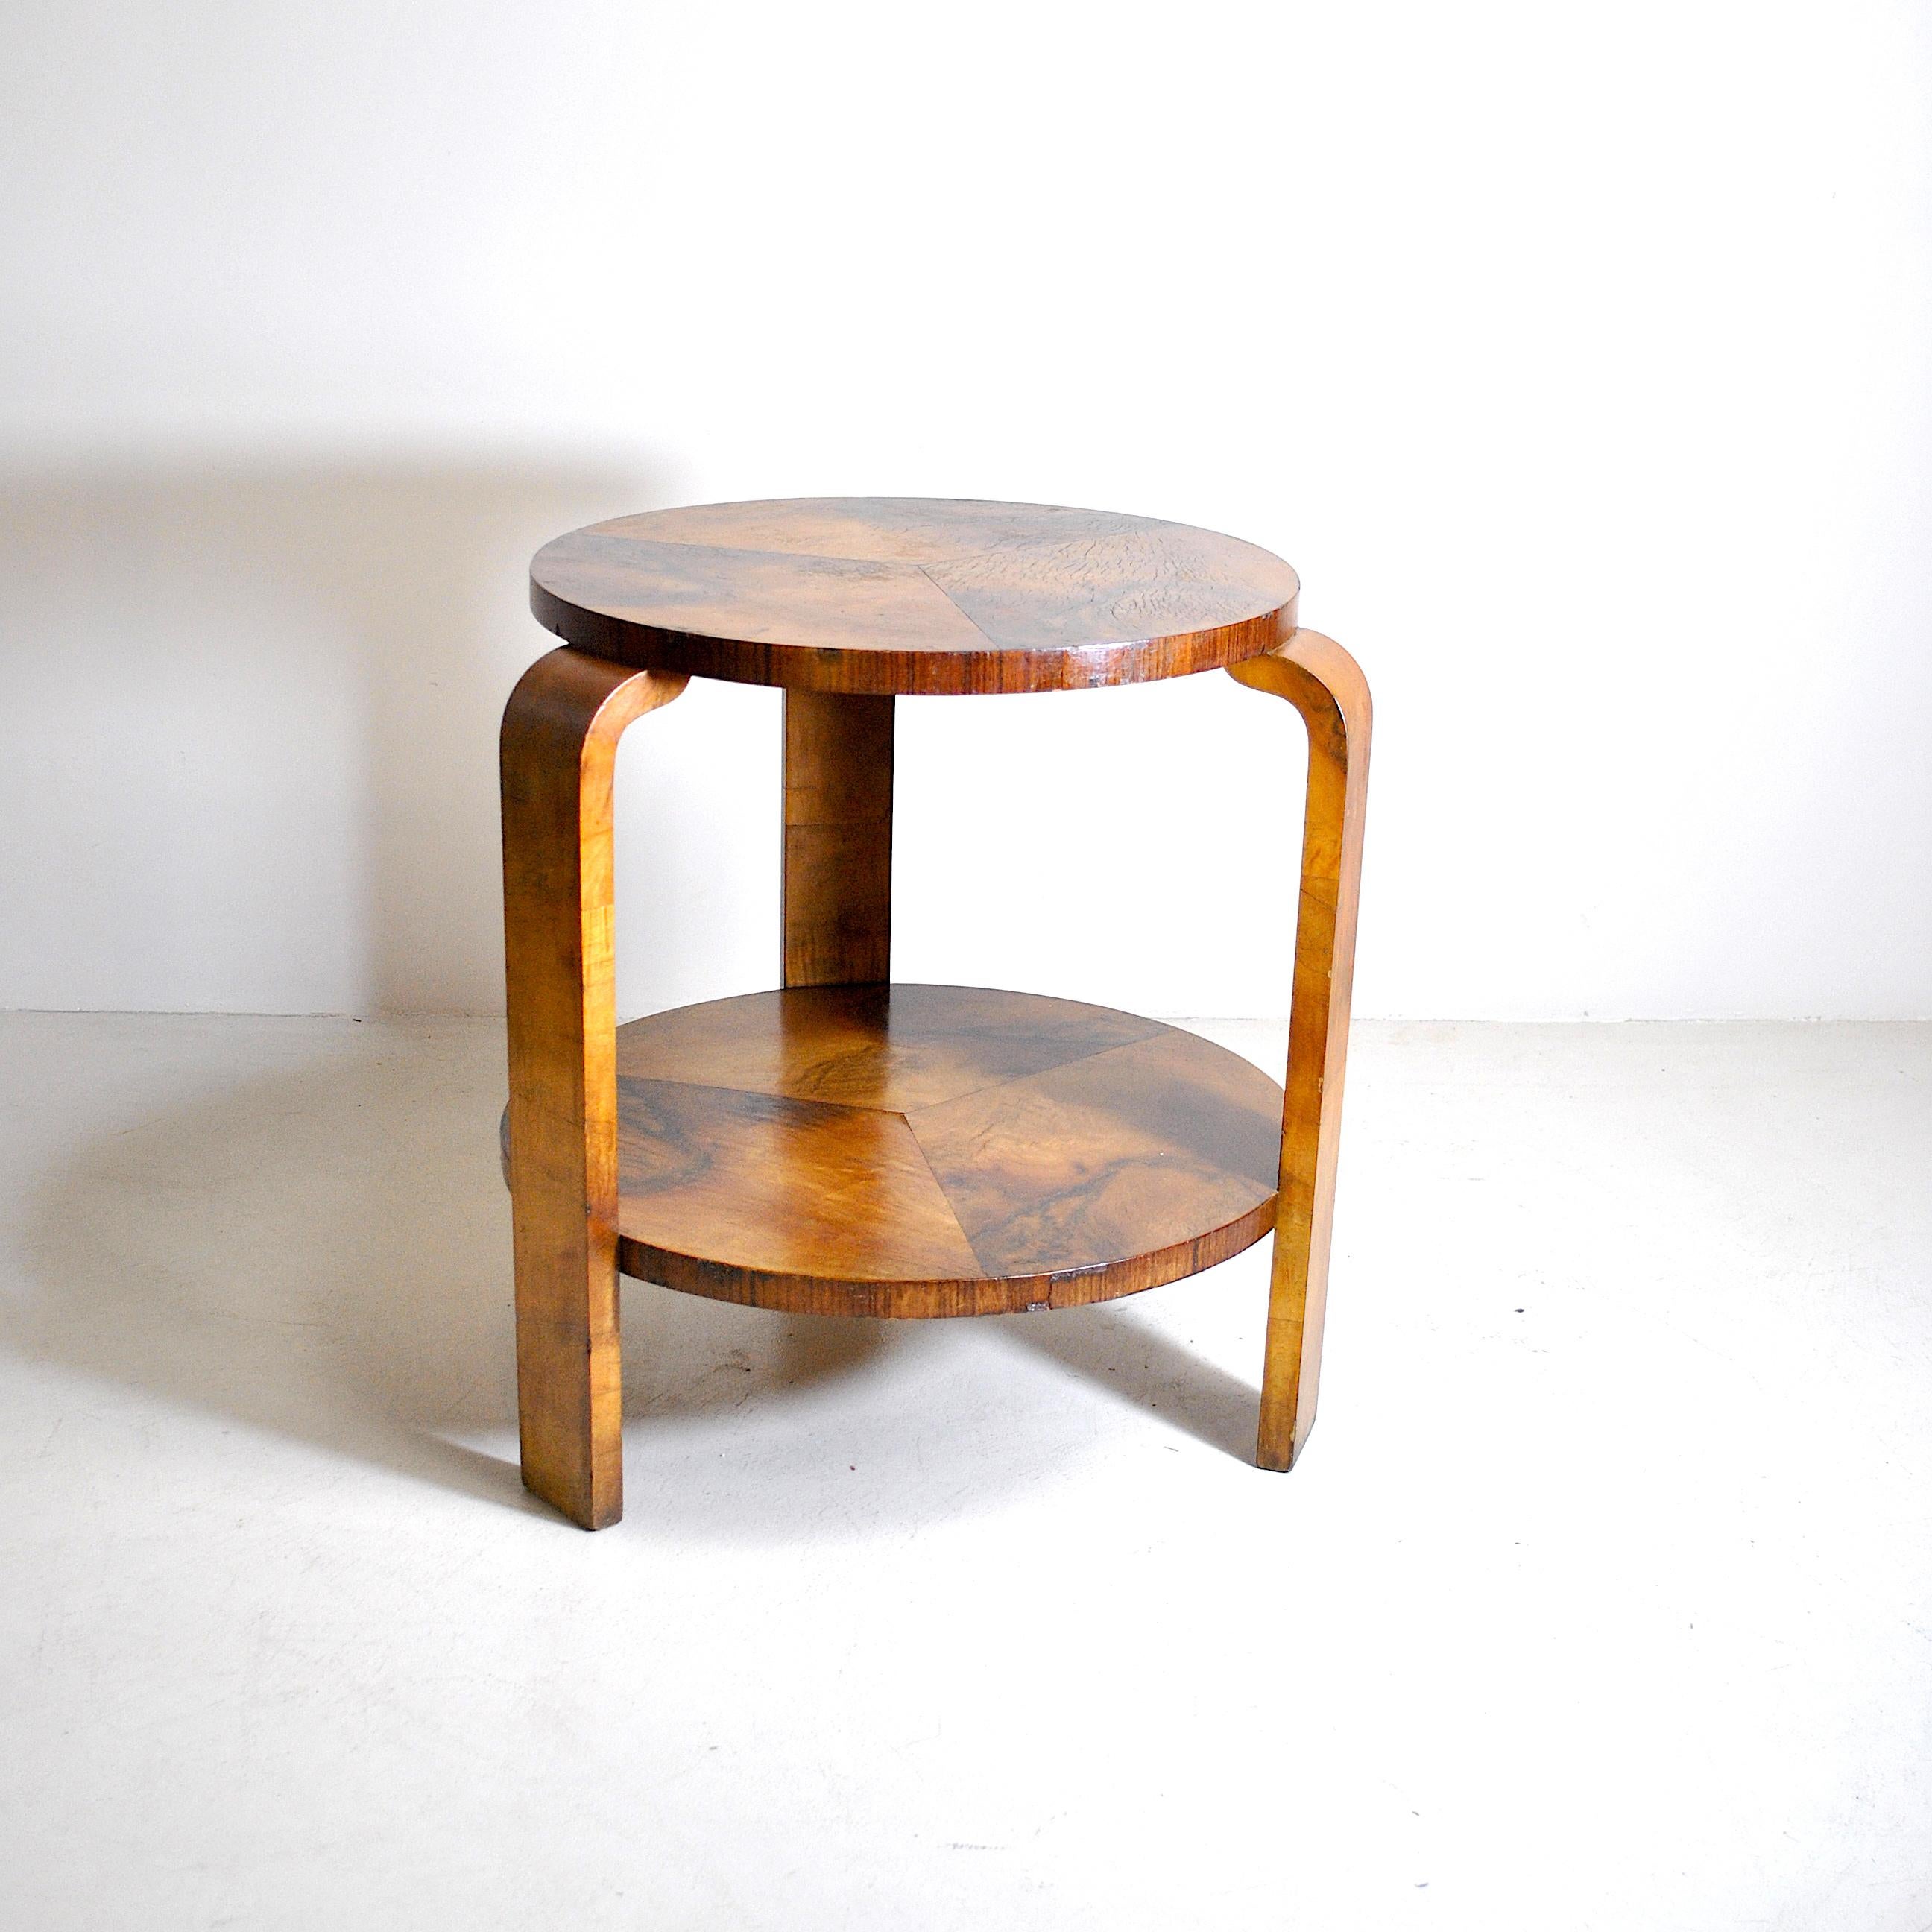 Circular coffee table mid-1940s Italian rationalism a constructive philosophy of 1930s and 1940s in Italy.